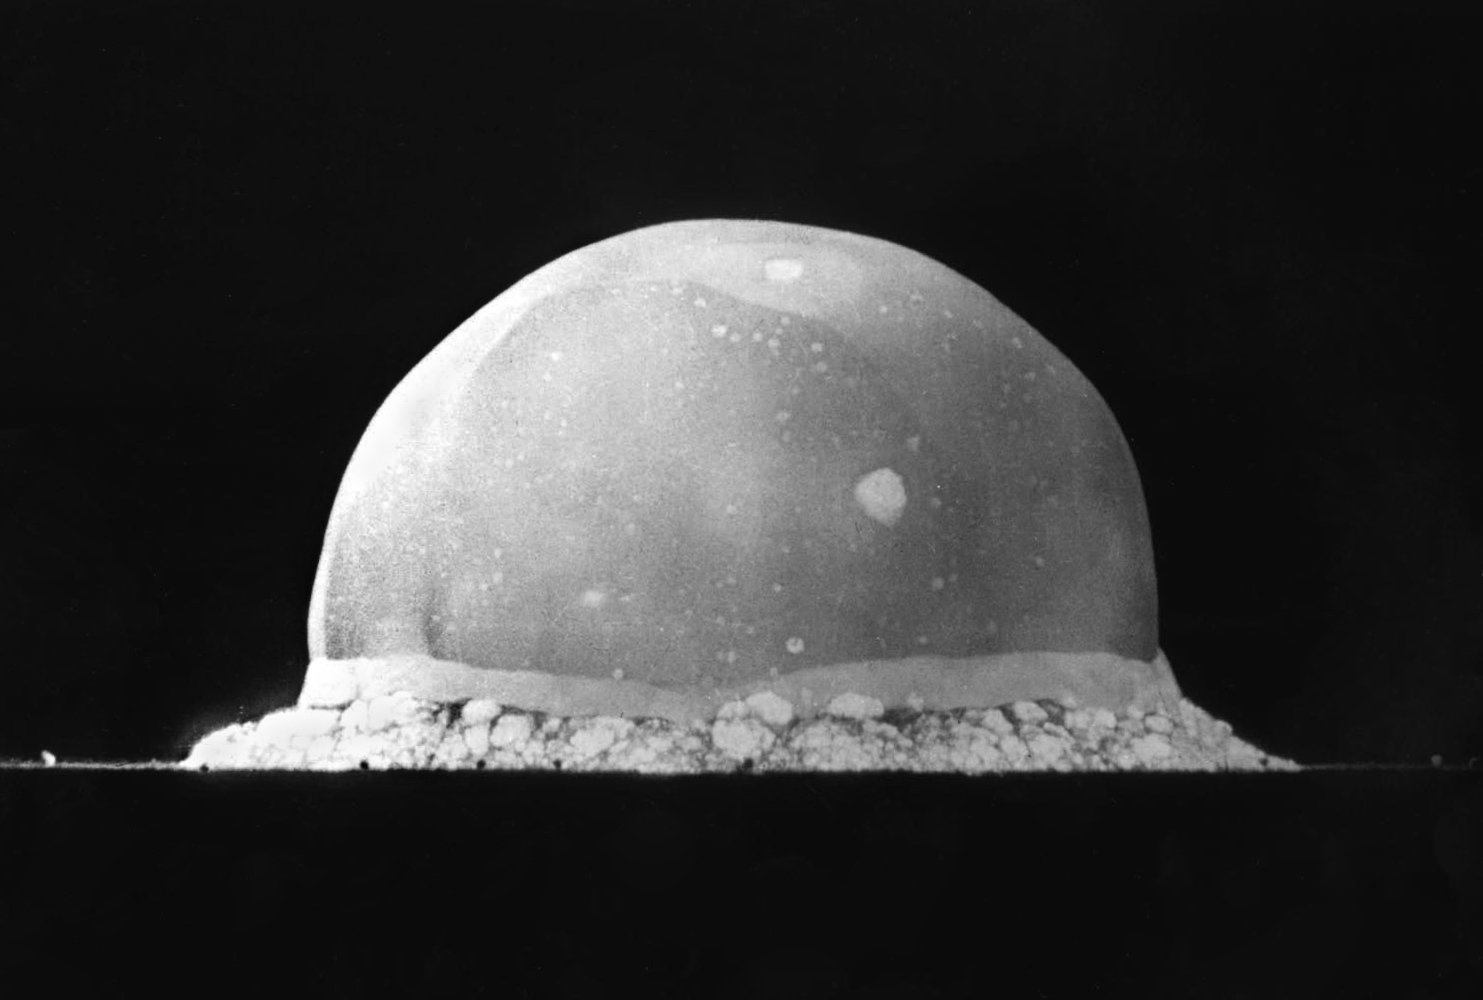 Trinity Site nuclear explosion, 0.016 seconds after explosion, July 16, 1945.